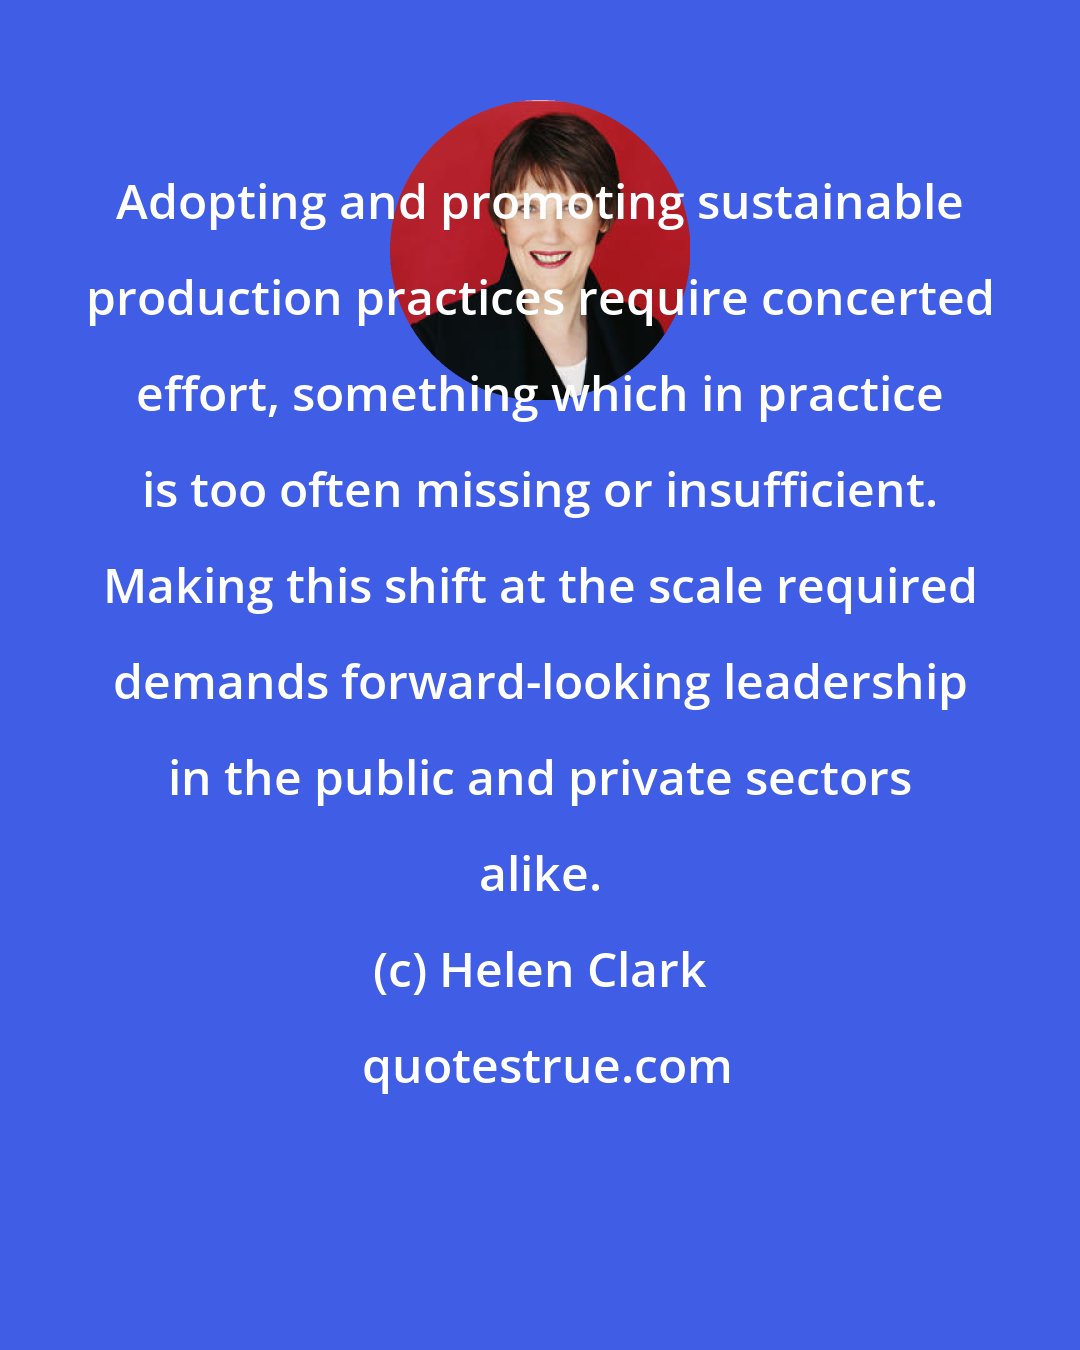 Helen Clark: Adopting and promoting sustainable production practices require concerted effort, something which in practice is too often missing or insufficient. Making this shift at the scale required demands forward-looking leadership in the public and private sectors alike.